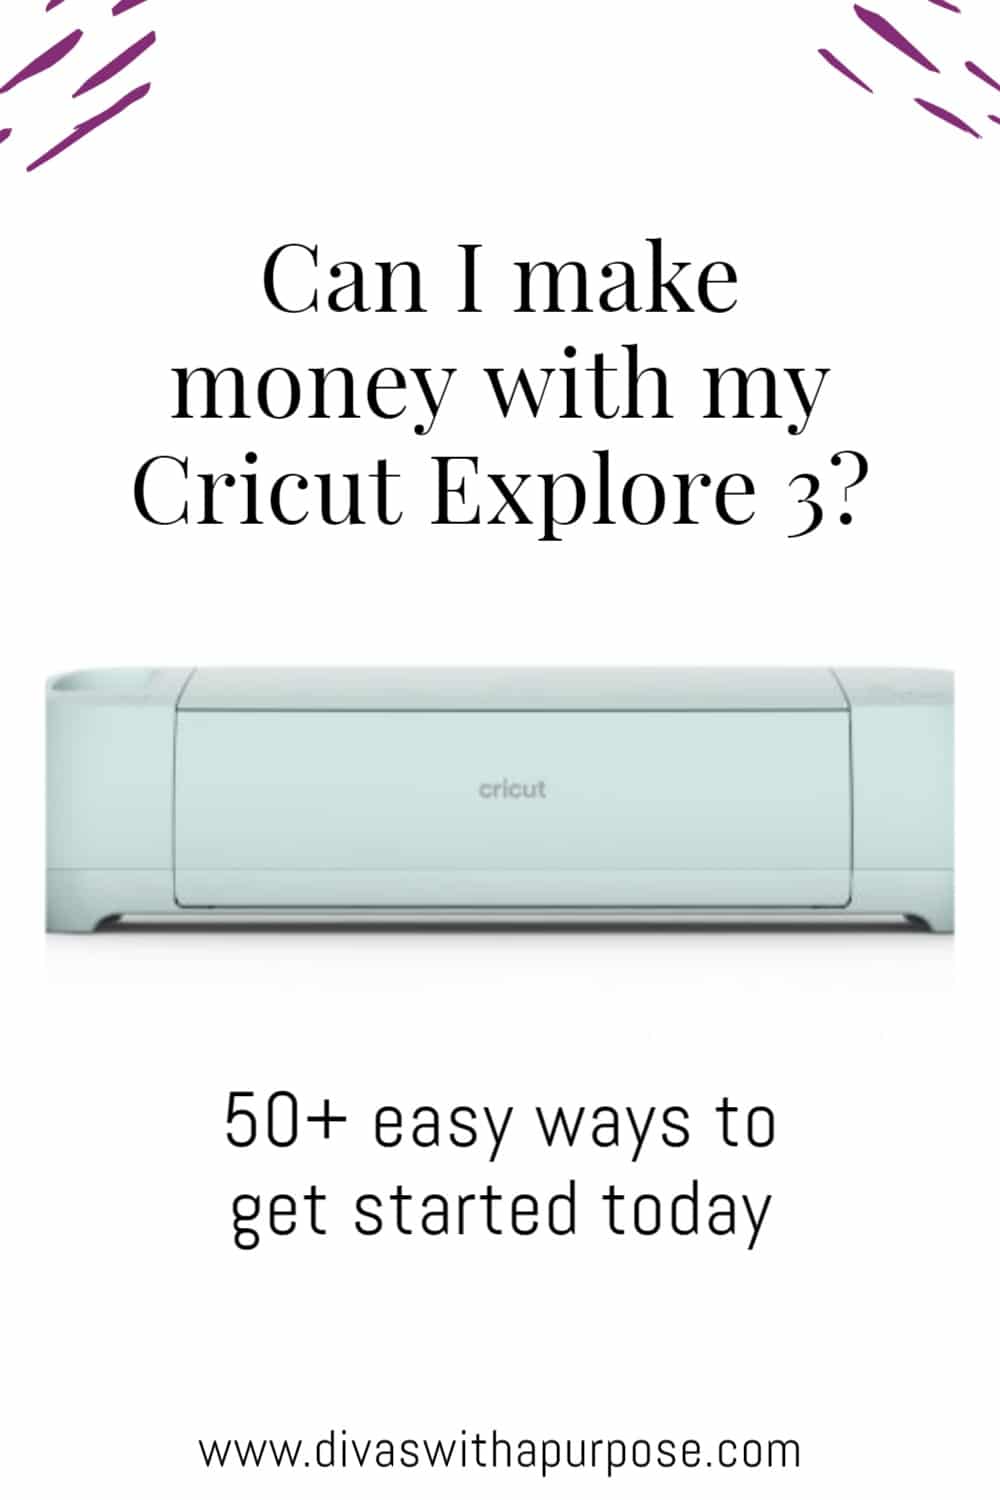 Here are 50+ ways to make money with your Cricut Explore | www.divaswithapurpose.com